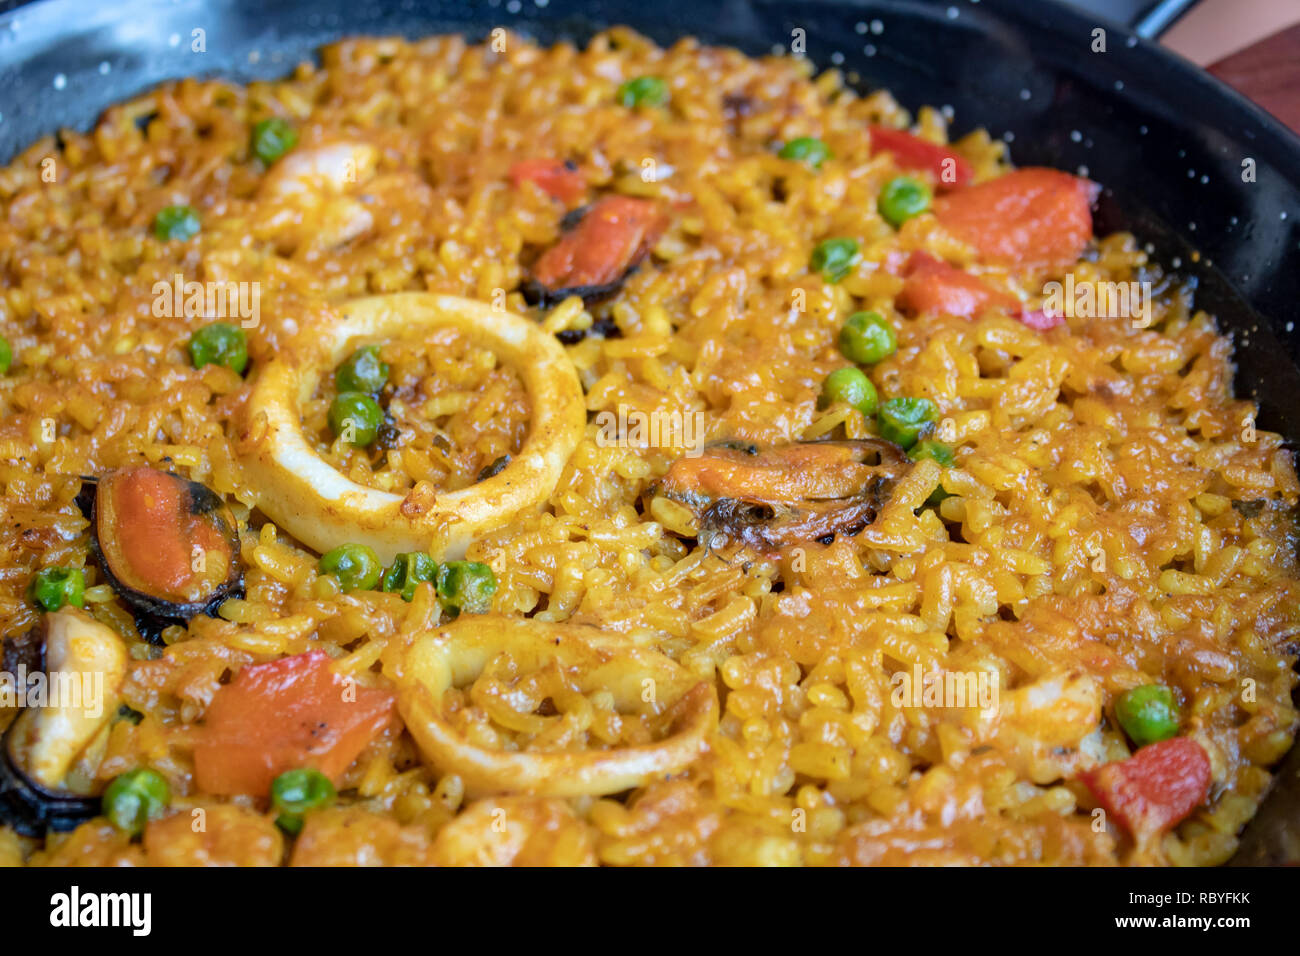 Fresh Spanish paella with rice and seafood in frying pan closeup Stock Photo